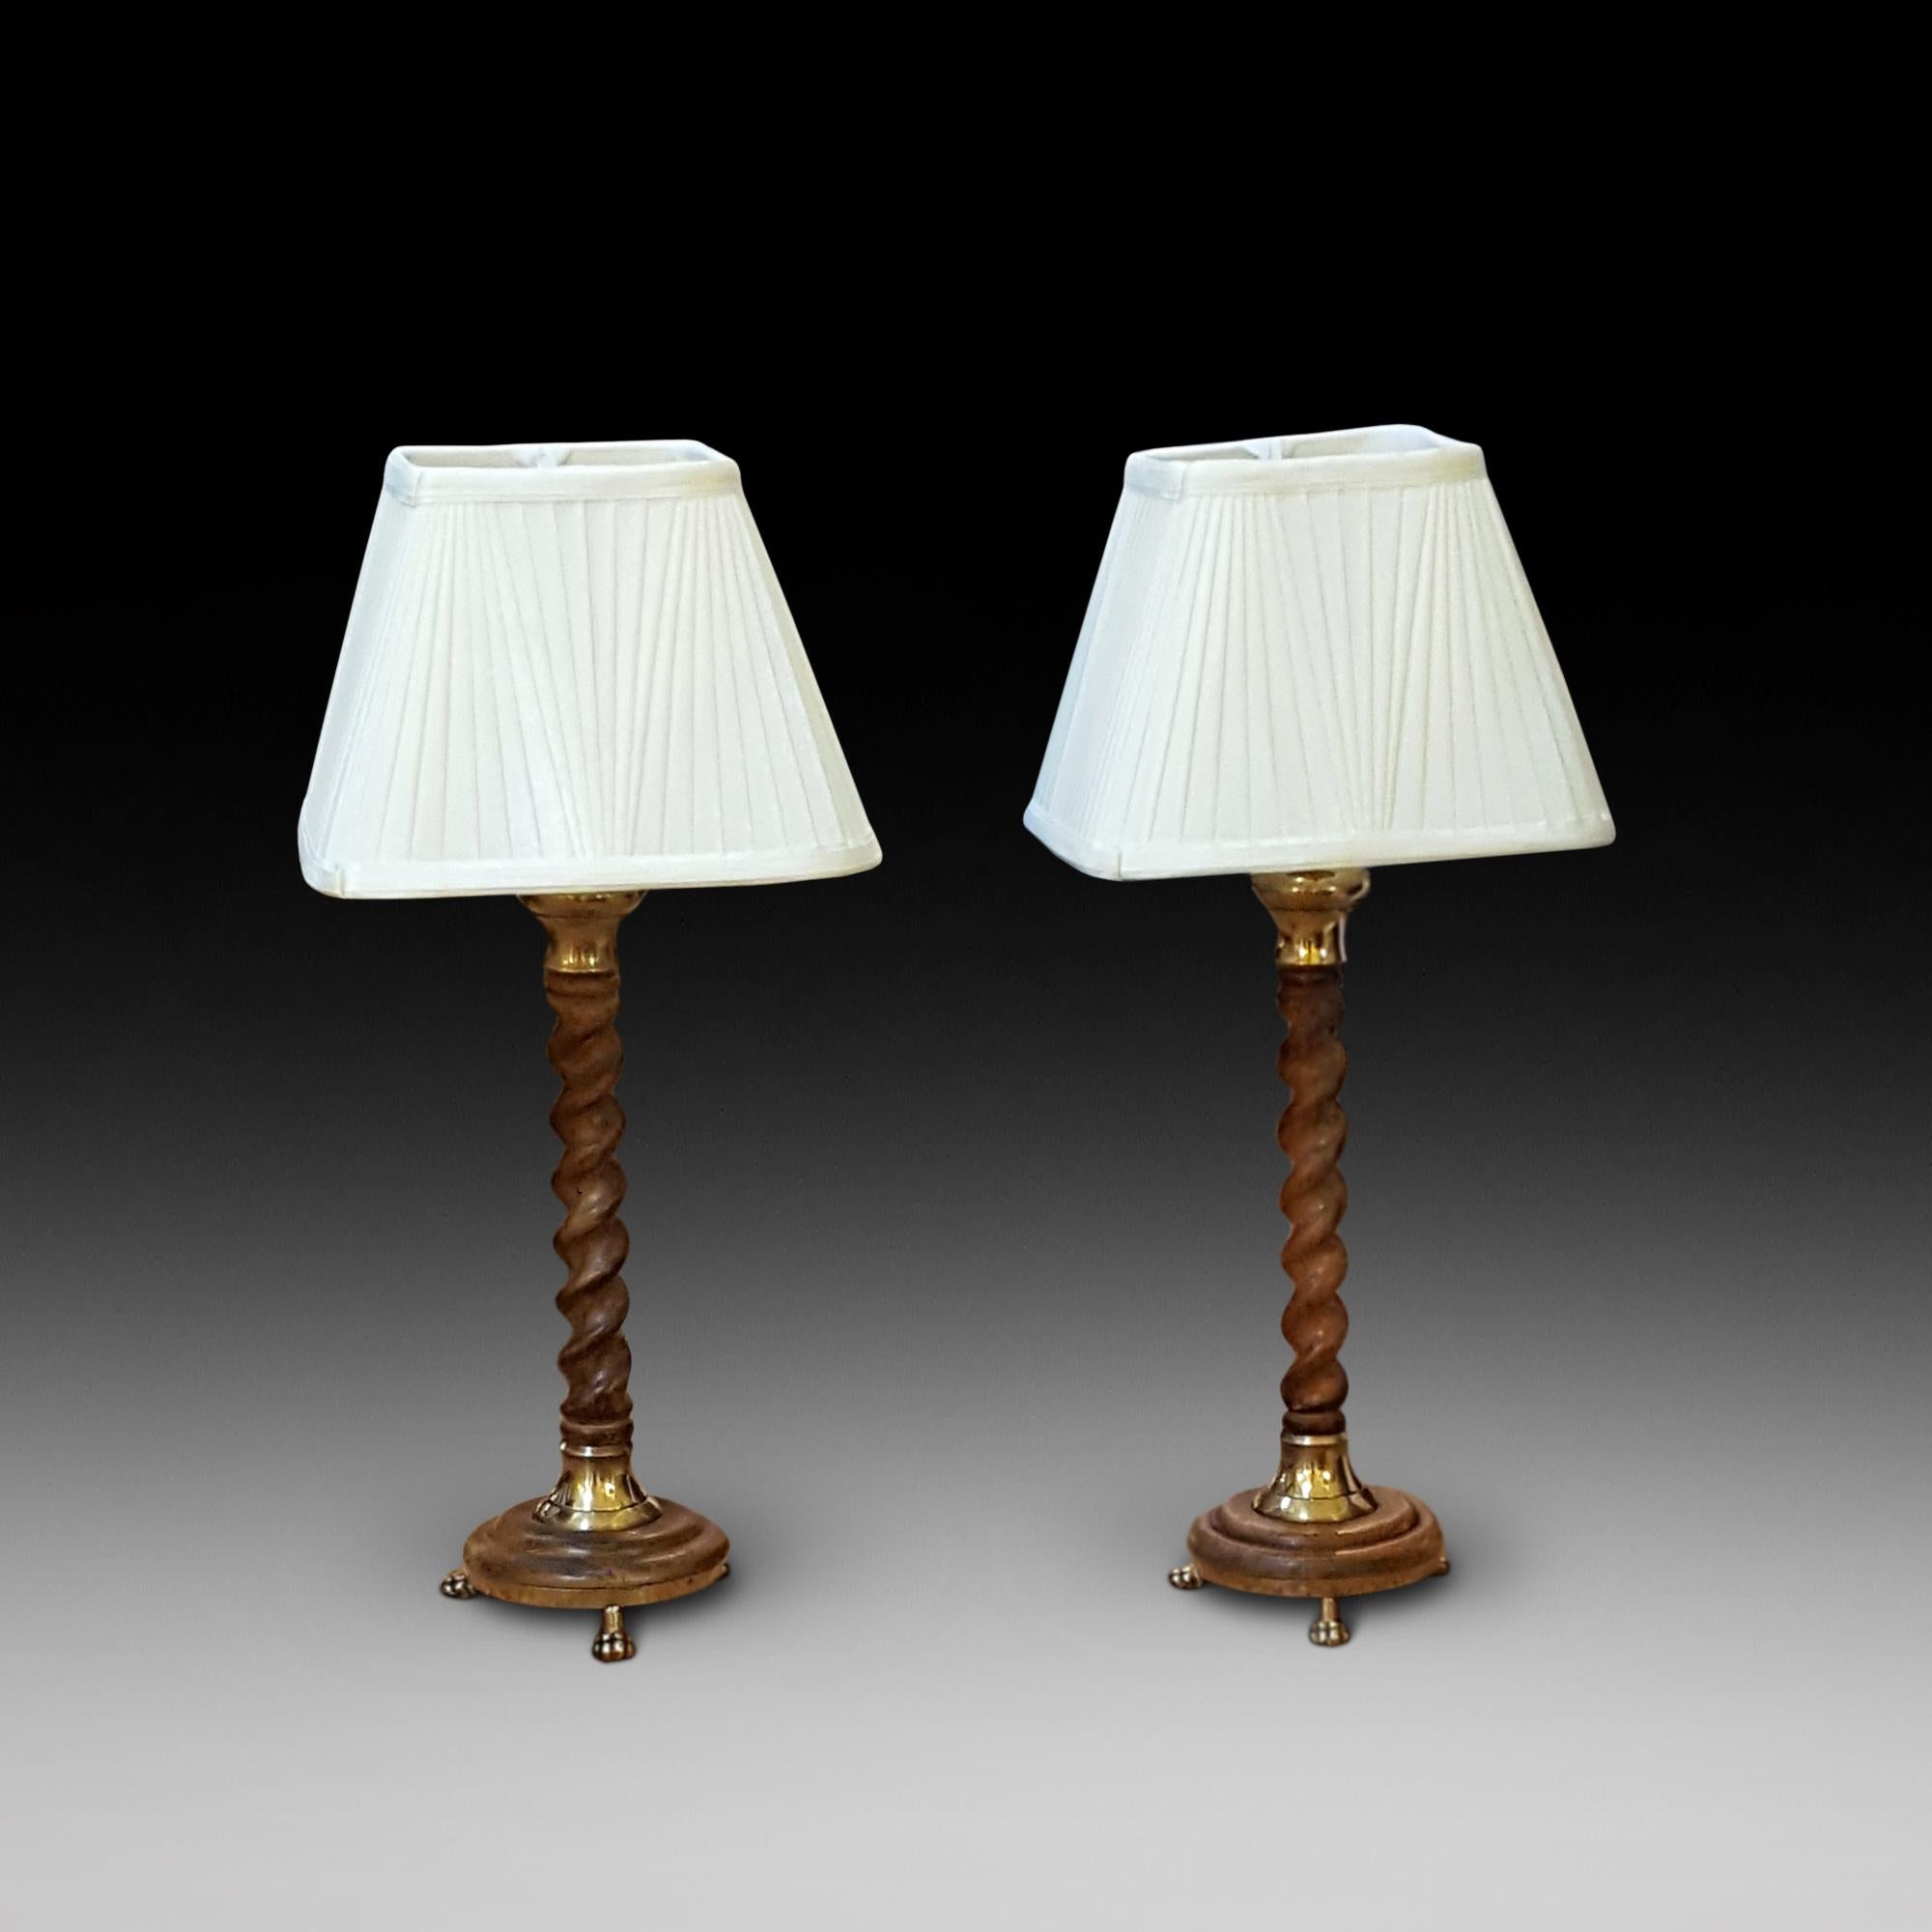 Pair of 1920s oak table lamps with Barley Twist columns and brass paw feet measures 10